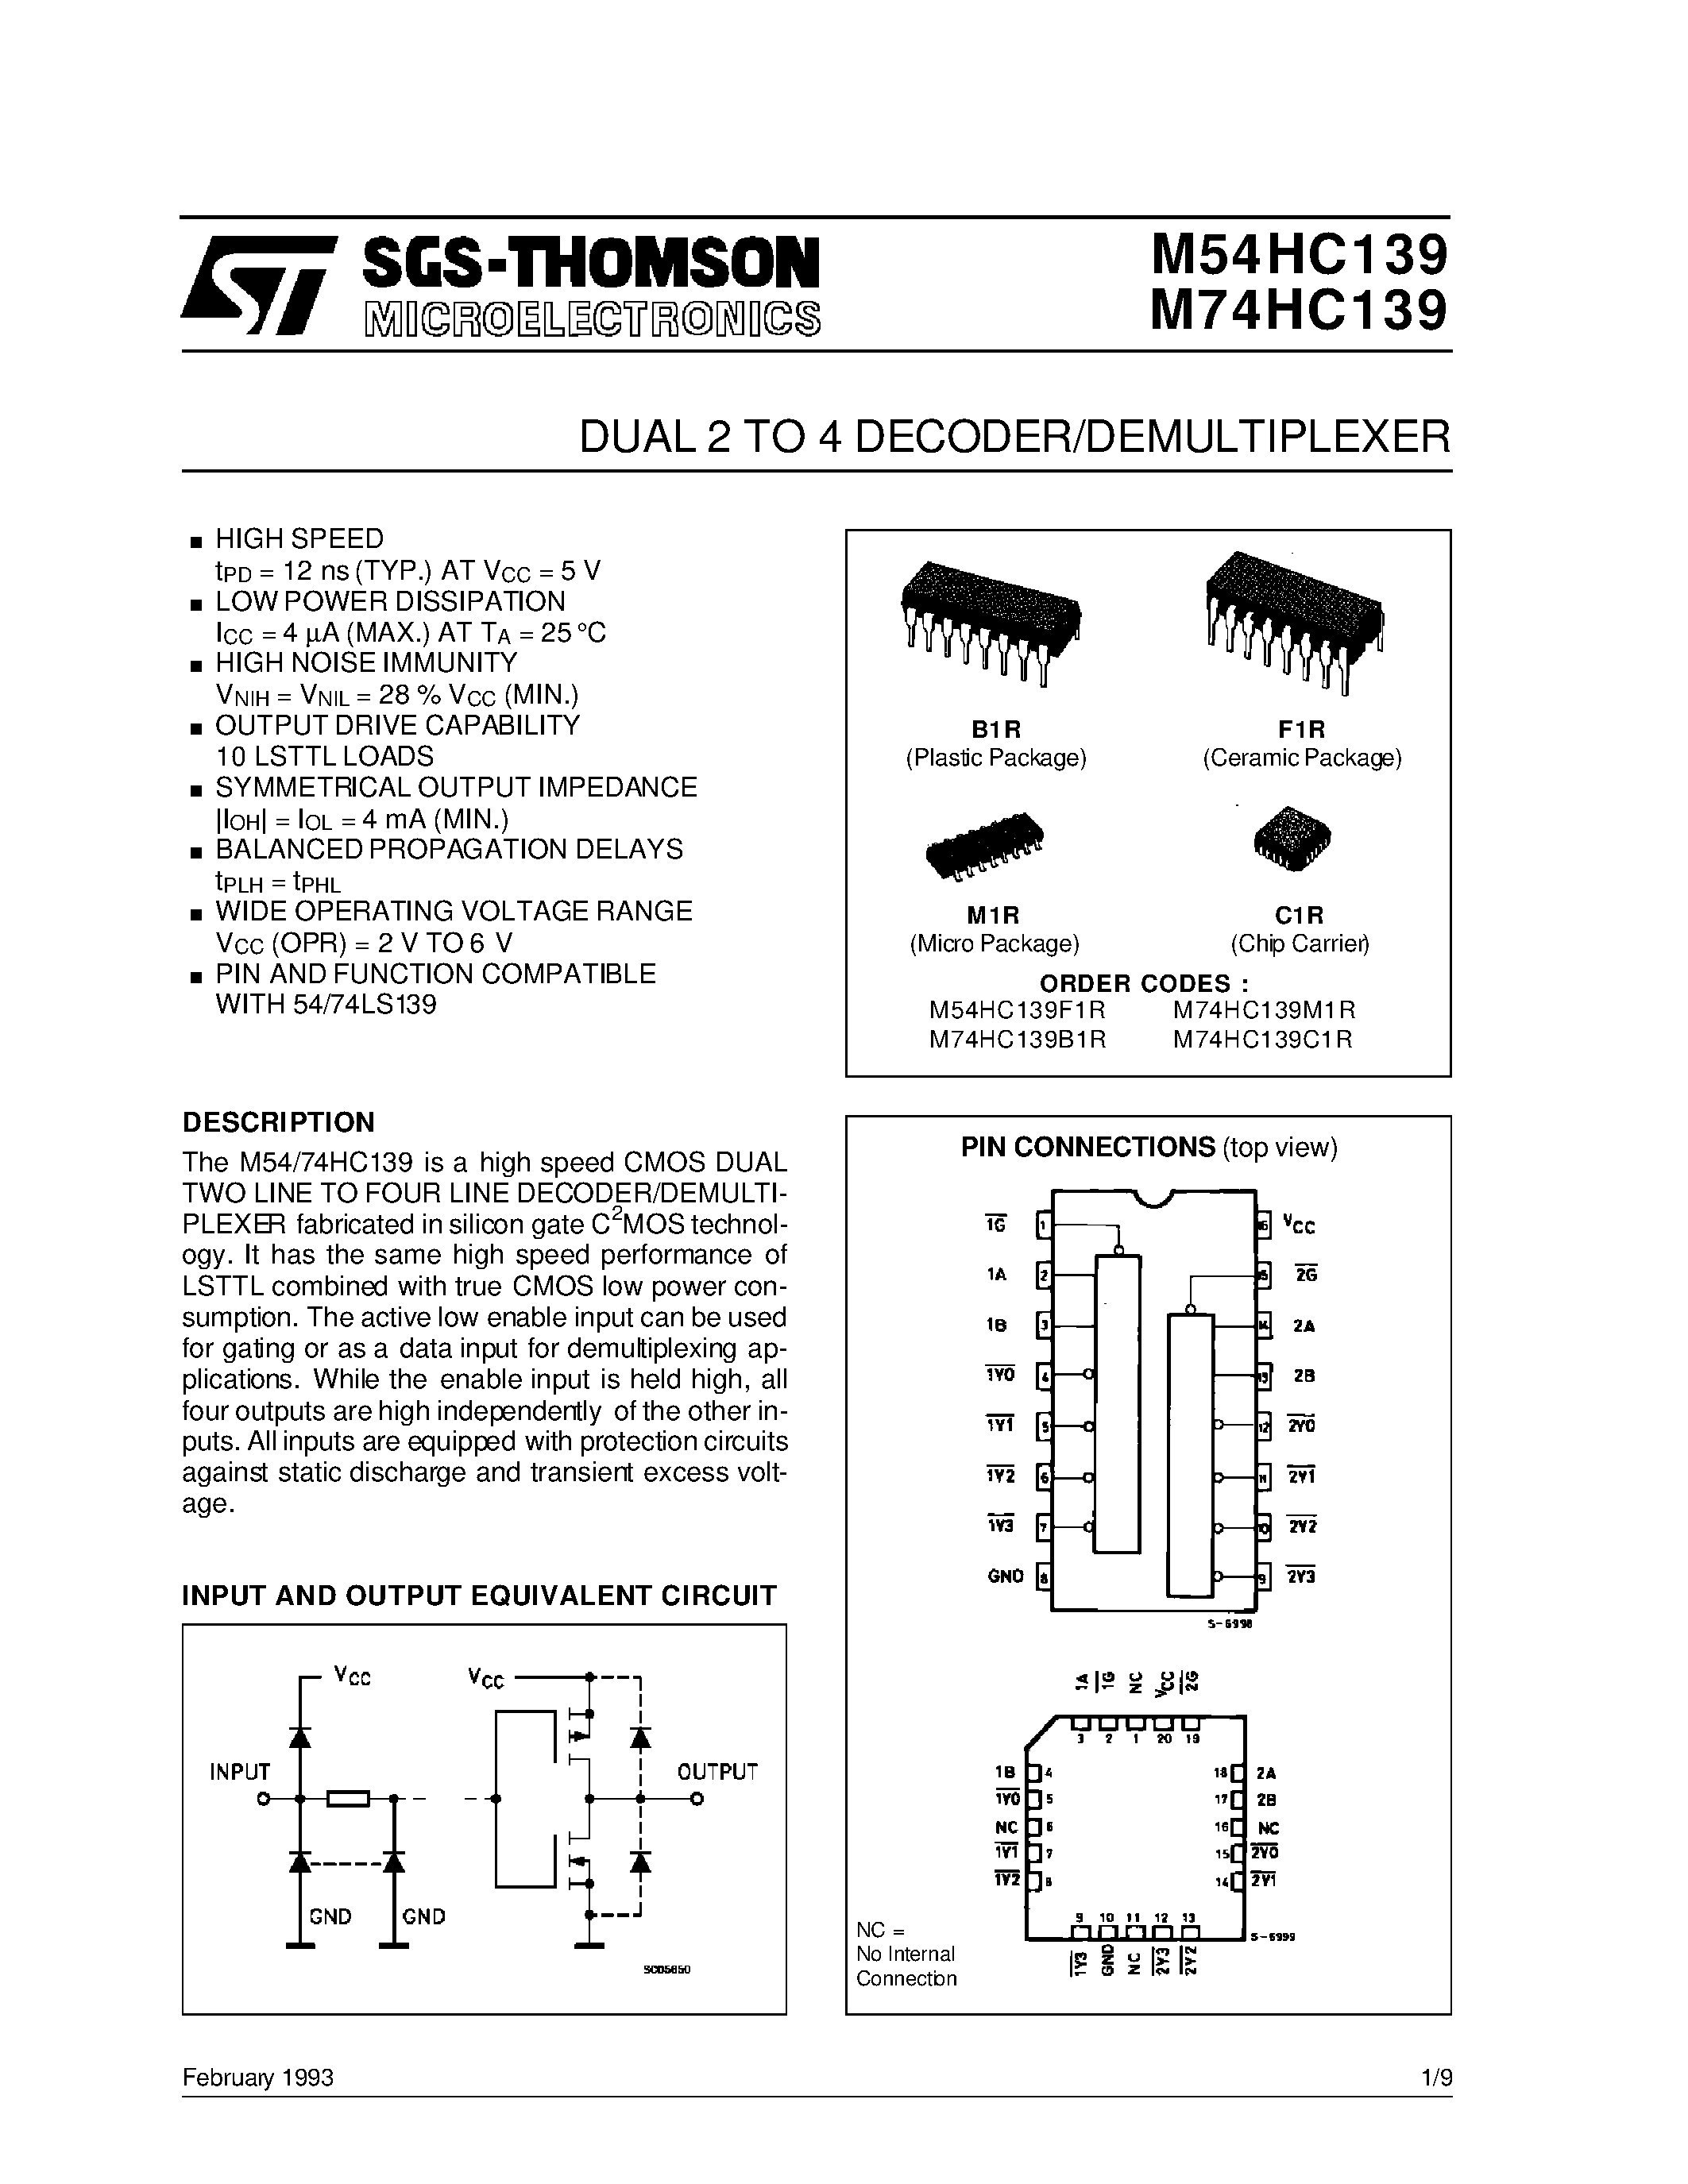 Datasheet M74HC139 - M54HC138F1R M74HC138M1R M74HC138B1R M74HC138C1R page 1